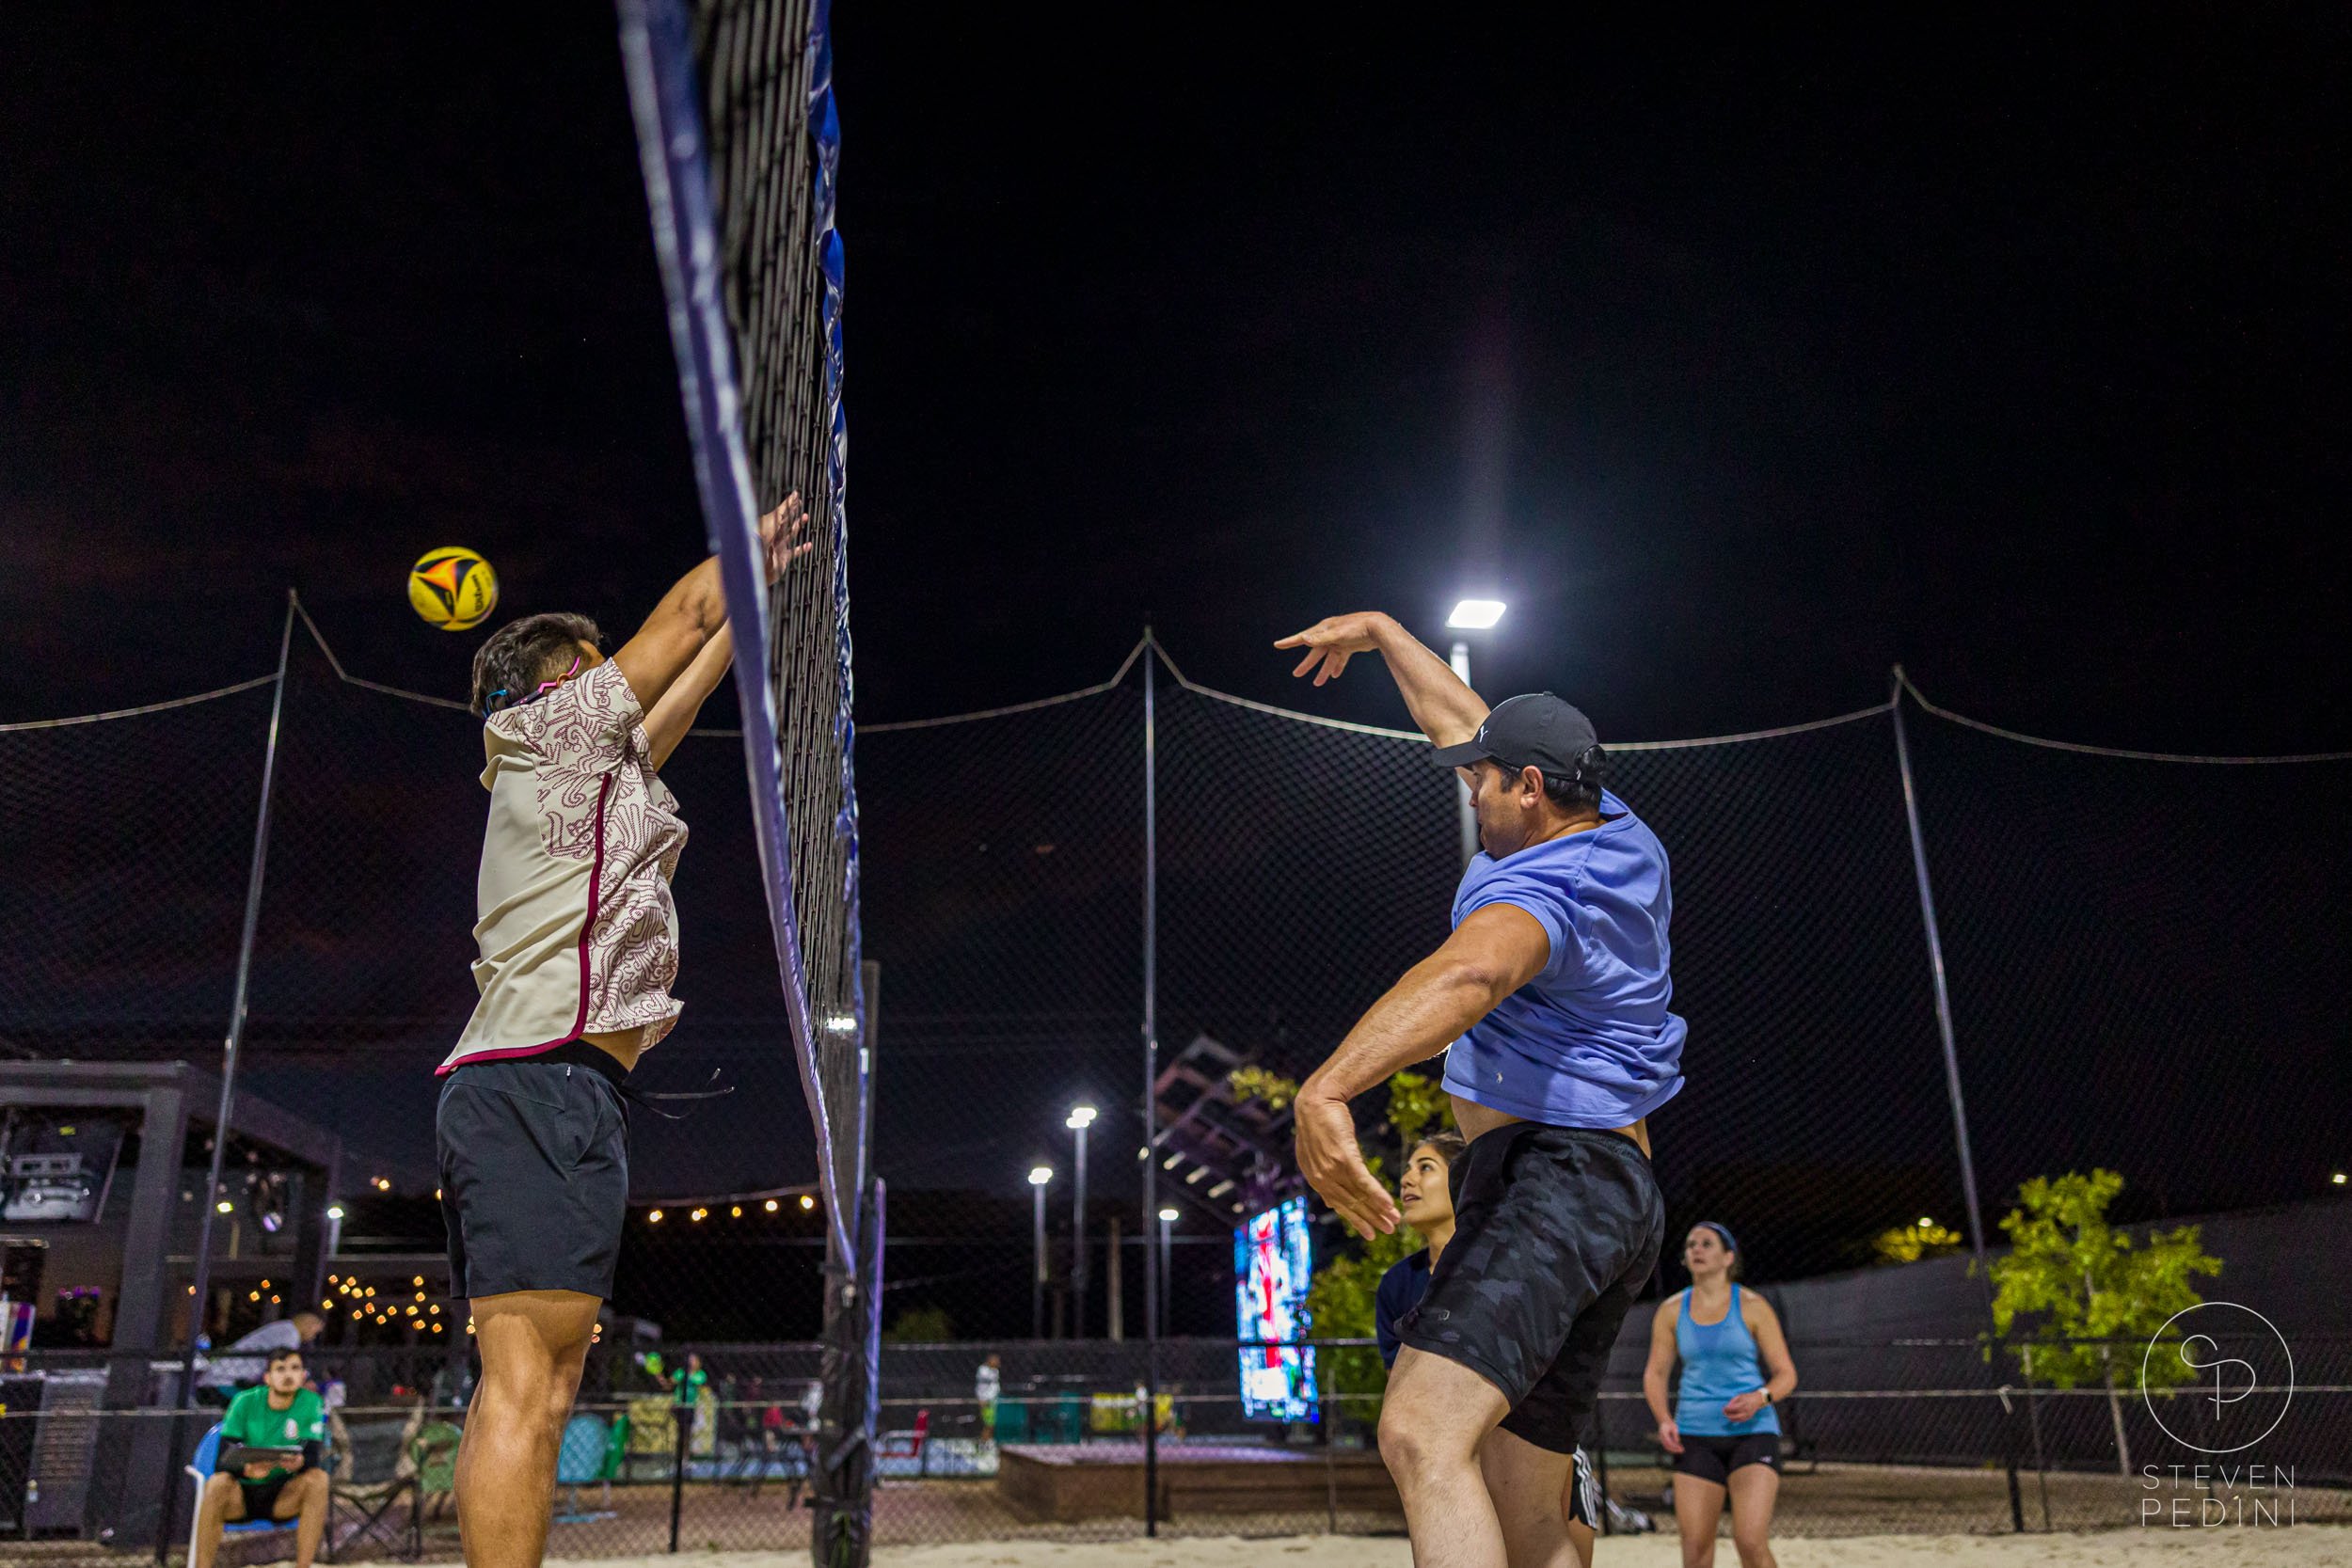 Steven Pedini Photography - Bumpy Pickle - Sand Volleyball - Houston TX - World Cup of Volleyball - 00386.jpg